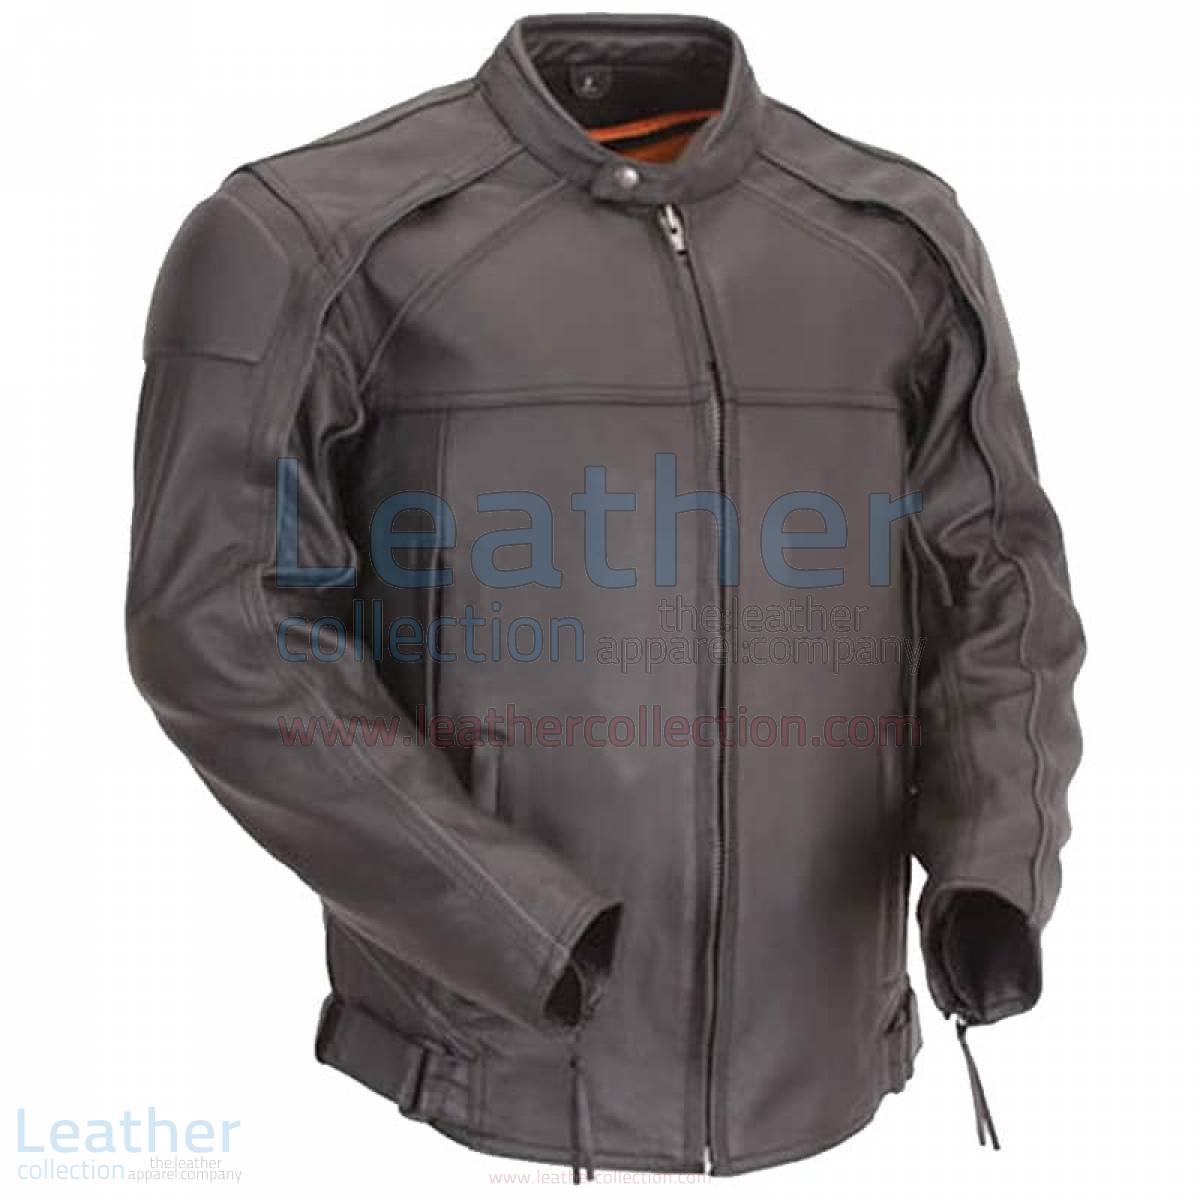 Leather Motorcycle Jacket with Reflective Piping